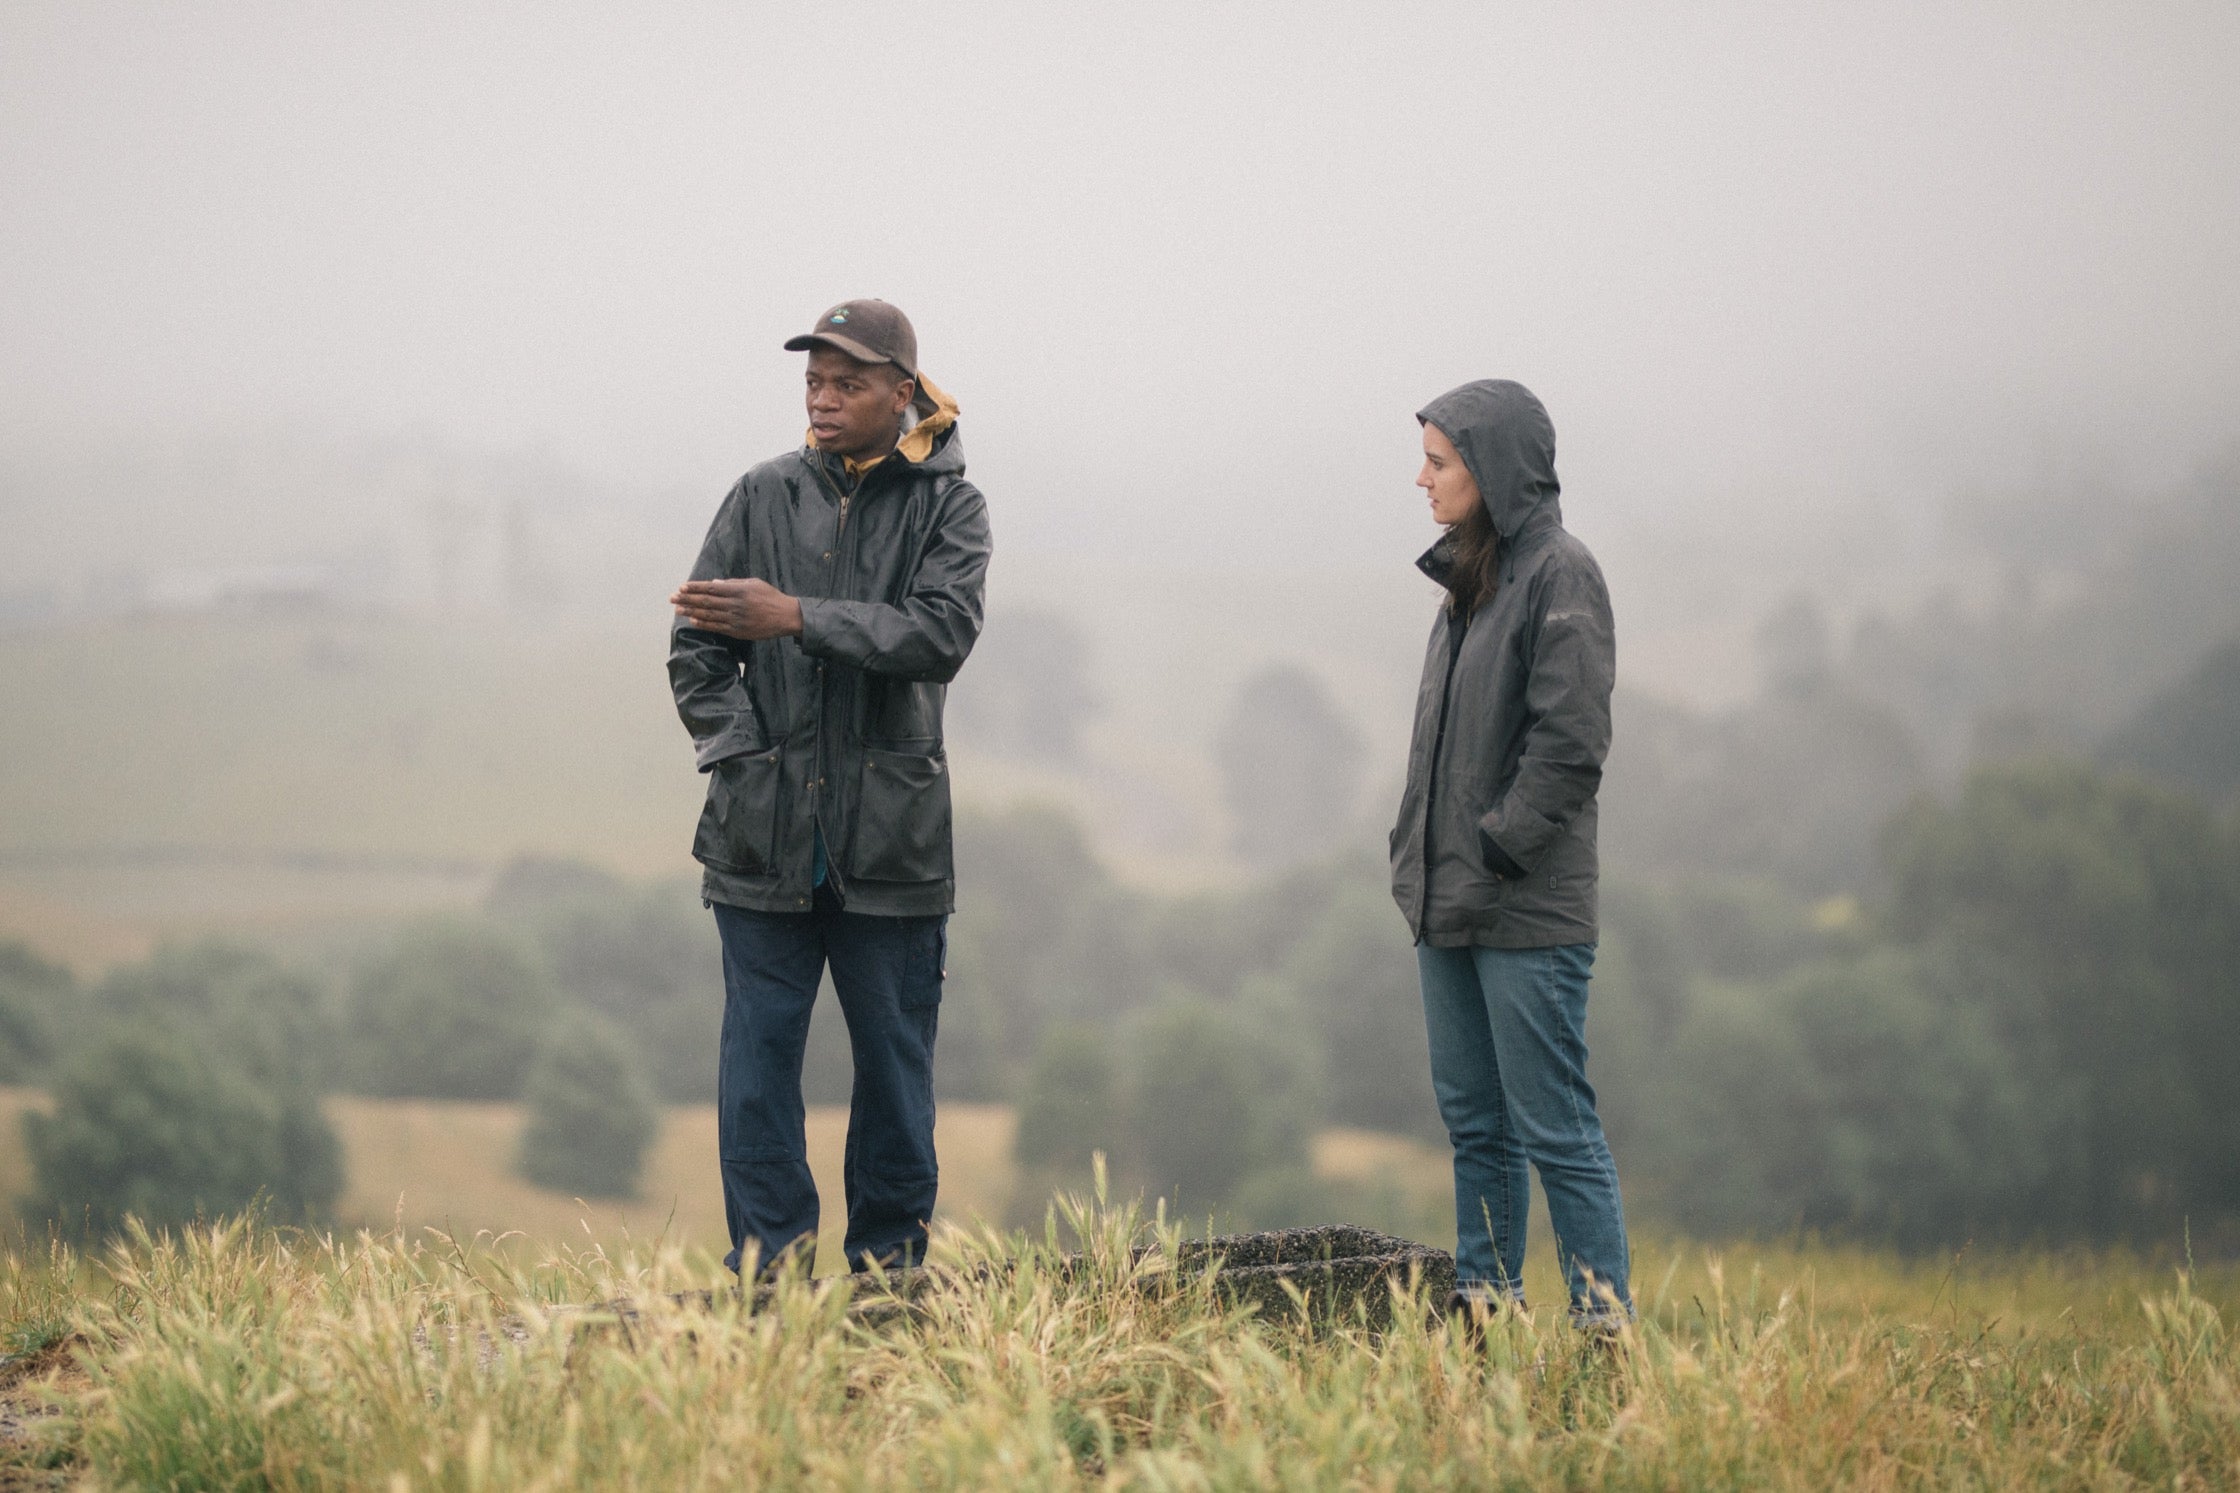 Nez and Ruby converse in a foggy field.